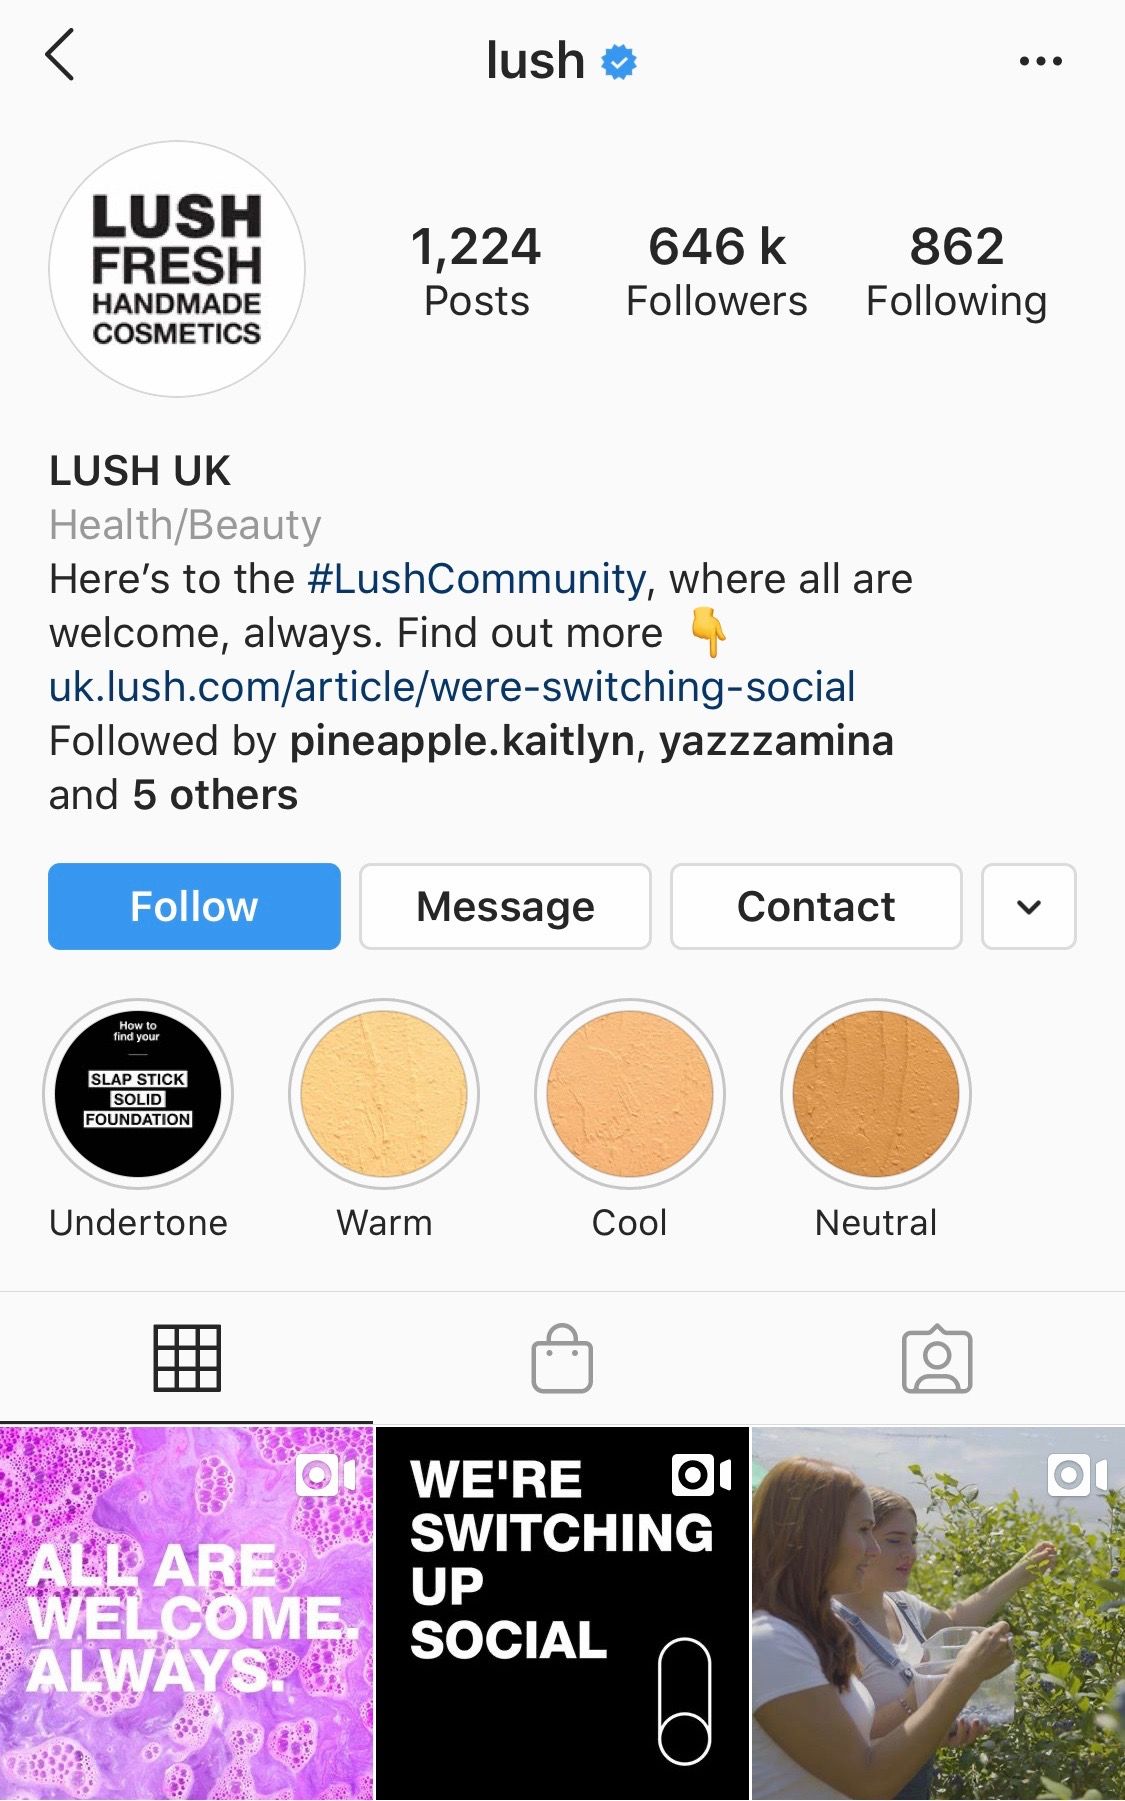 @lush states ‘all are welcome, always’ on their Instagram bio